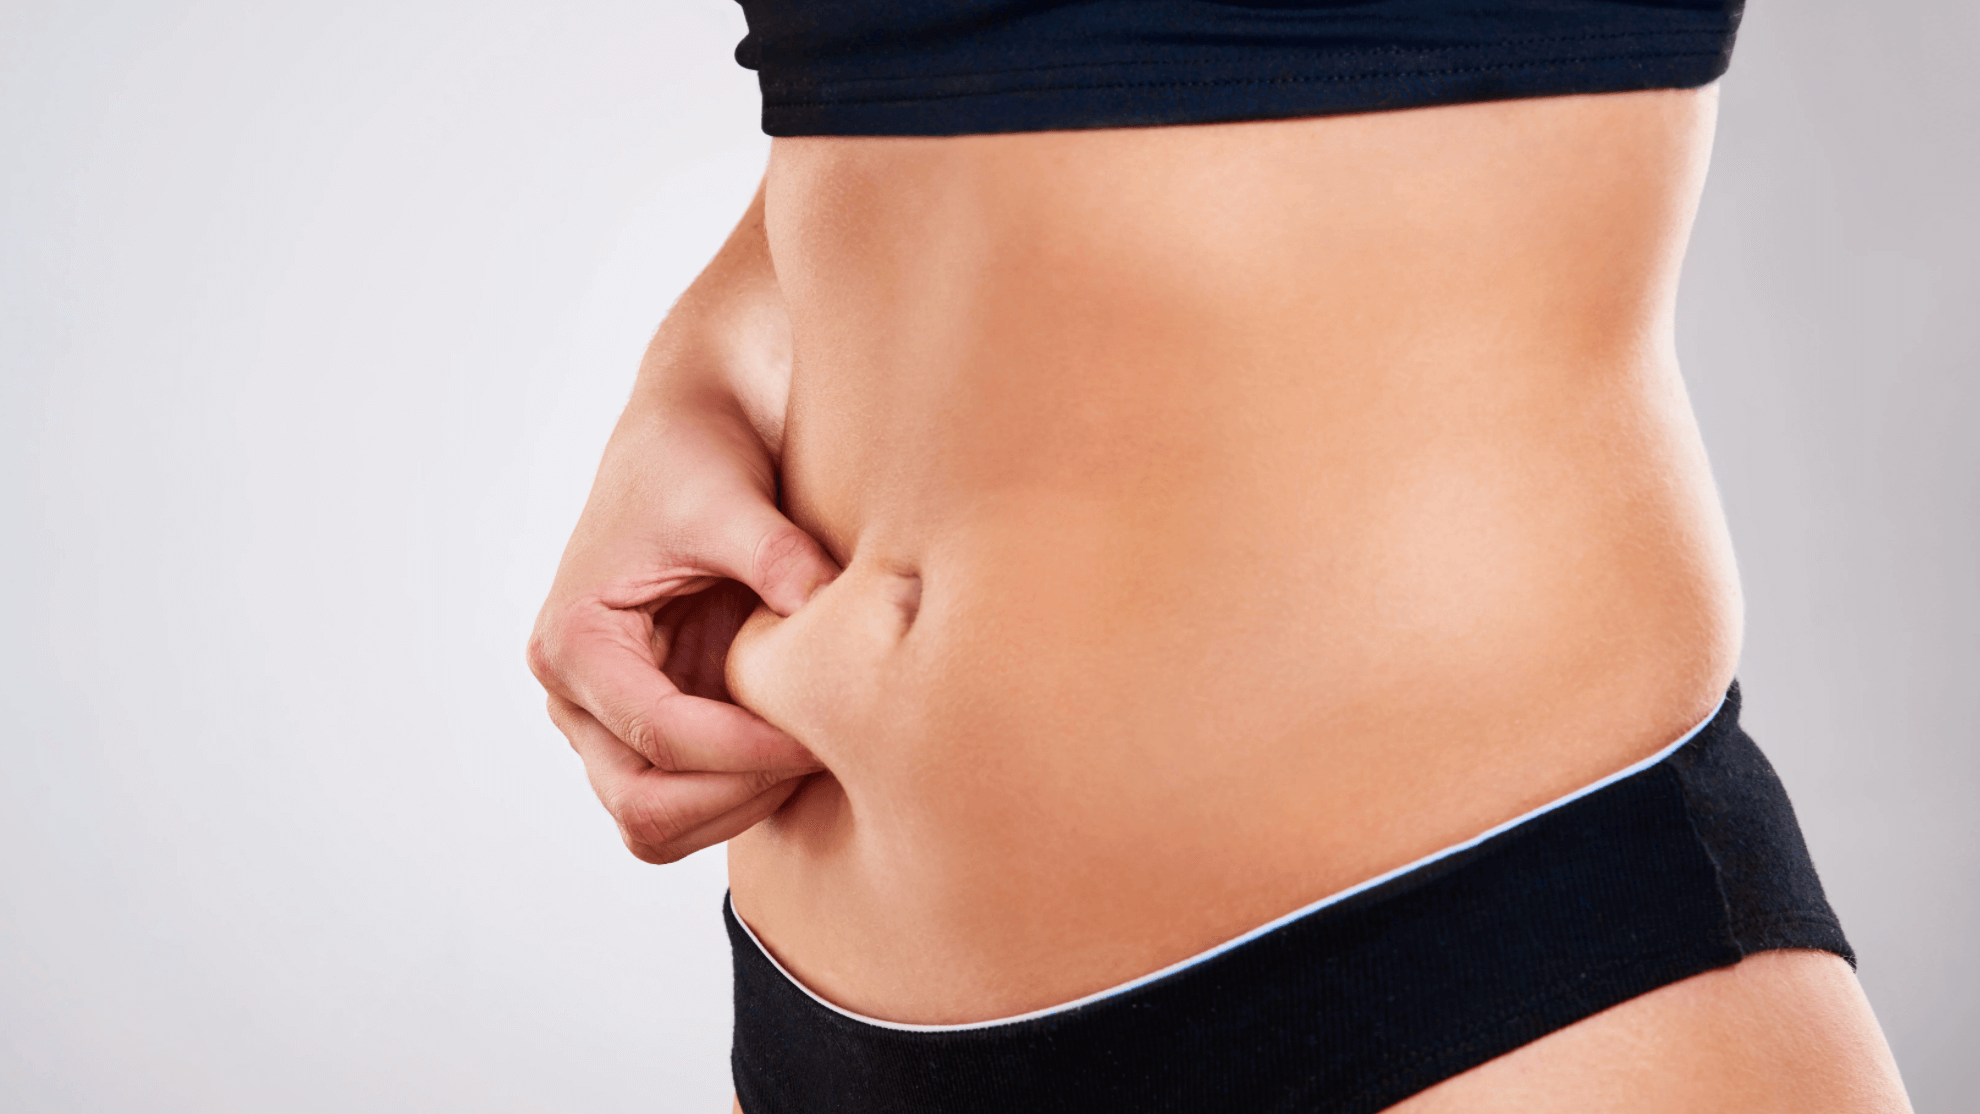 Belly Fat: What Can We Remove with a Tummy Tuck?